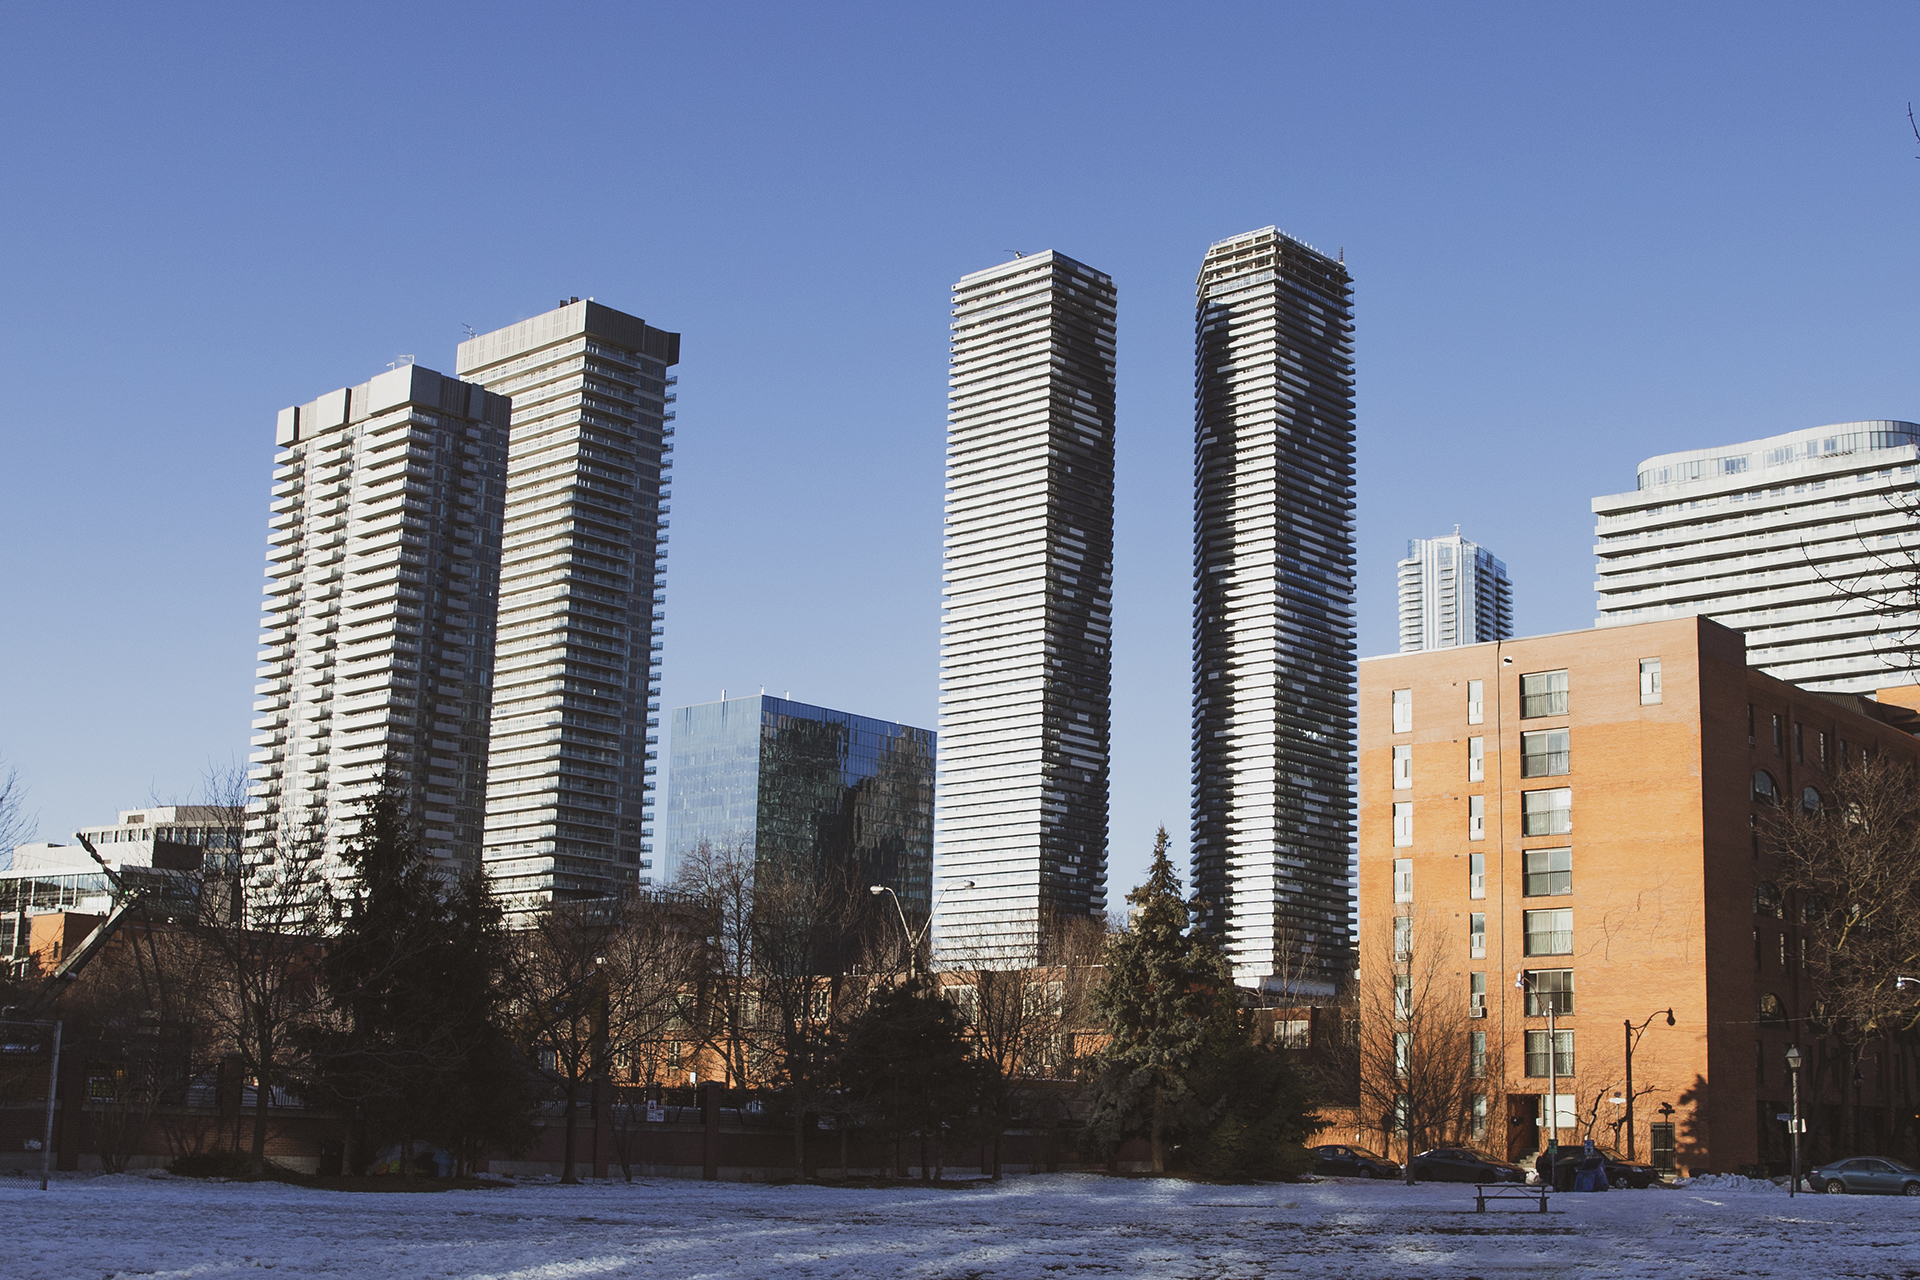 A snow-covered park in the early morning. There are a few trees scattered across the background. There is one 8-story, brick apartment building, and multiple tall glass buildings in the distance.